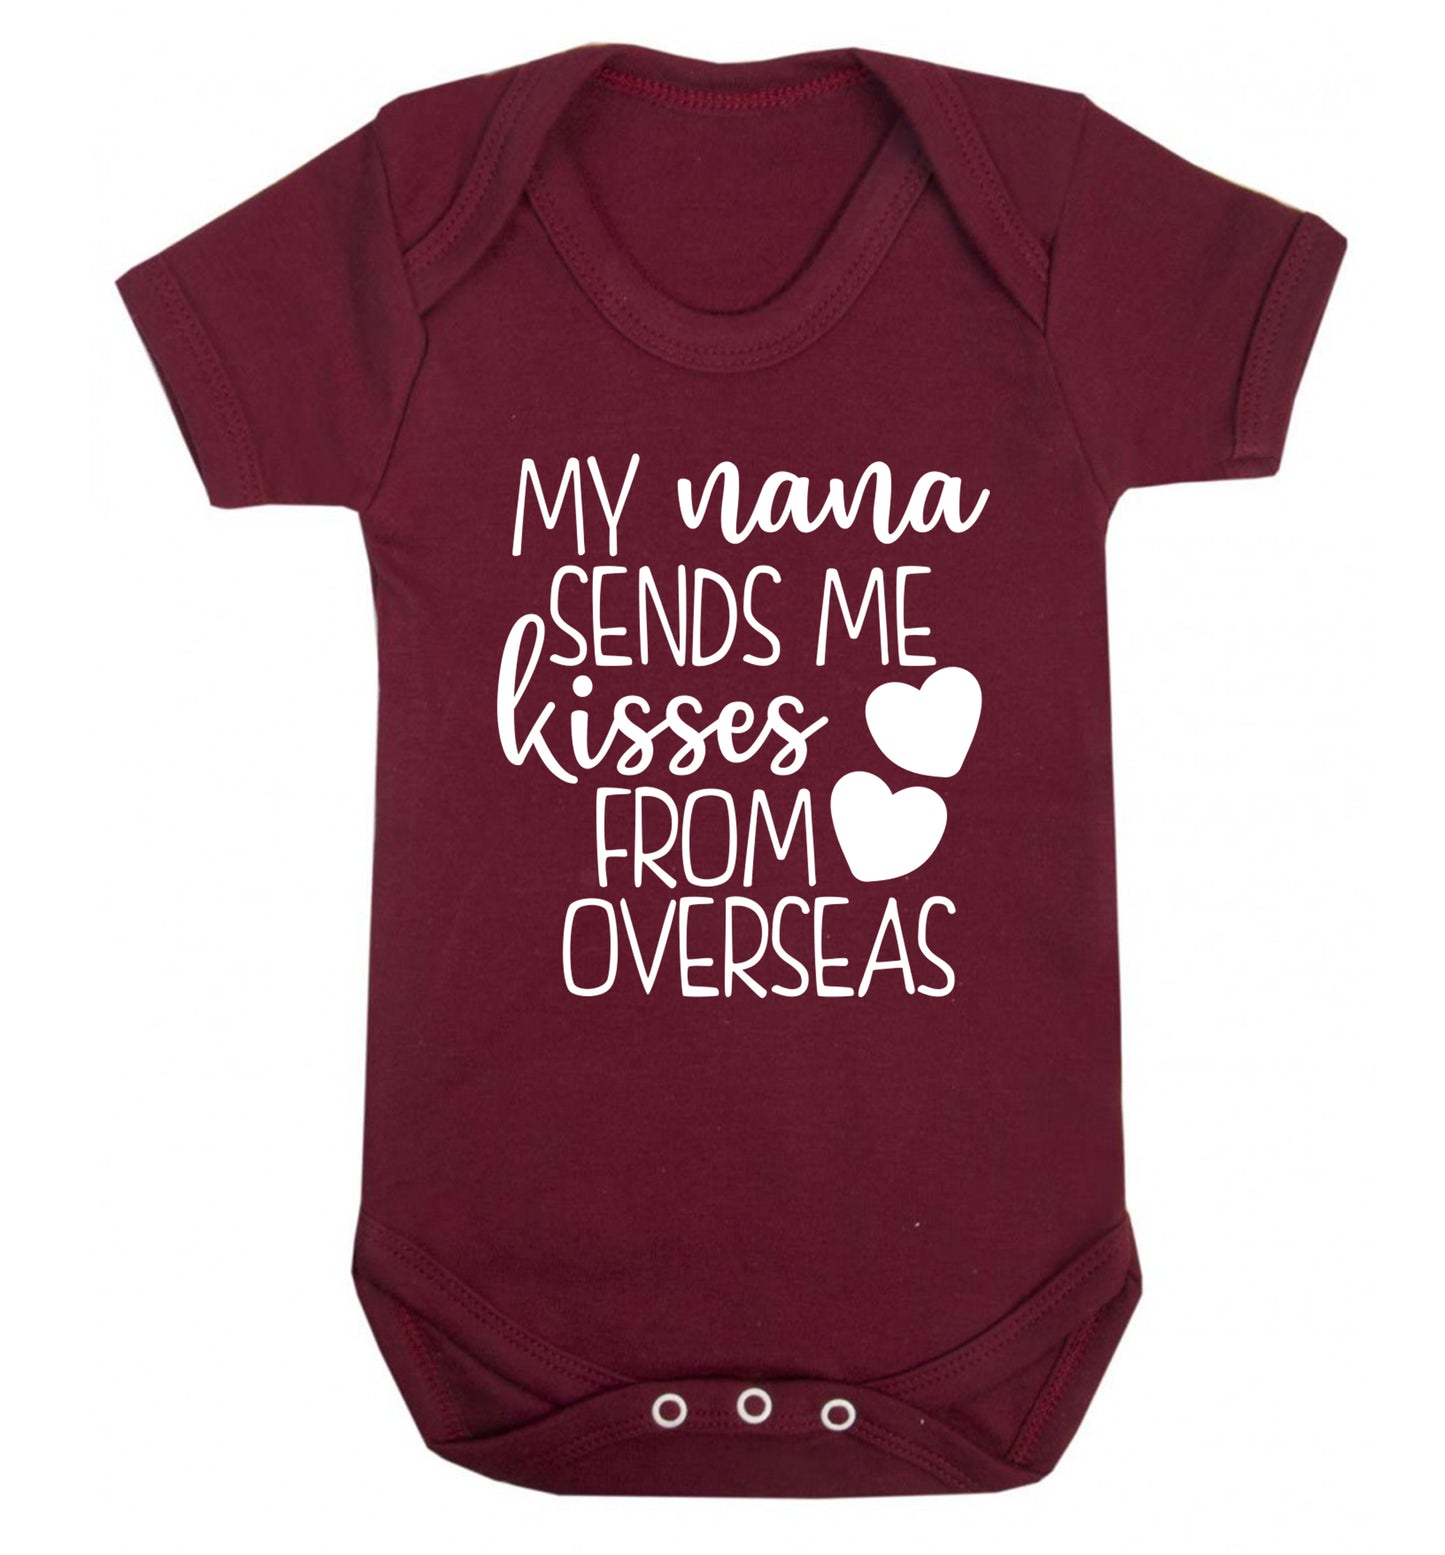 My nana sends me kisses from overseas Baby Vest maroon 18-24 months